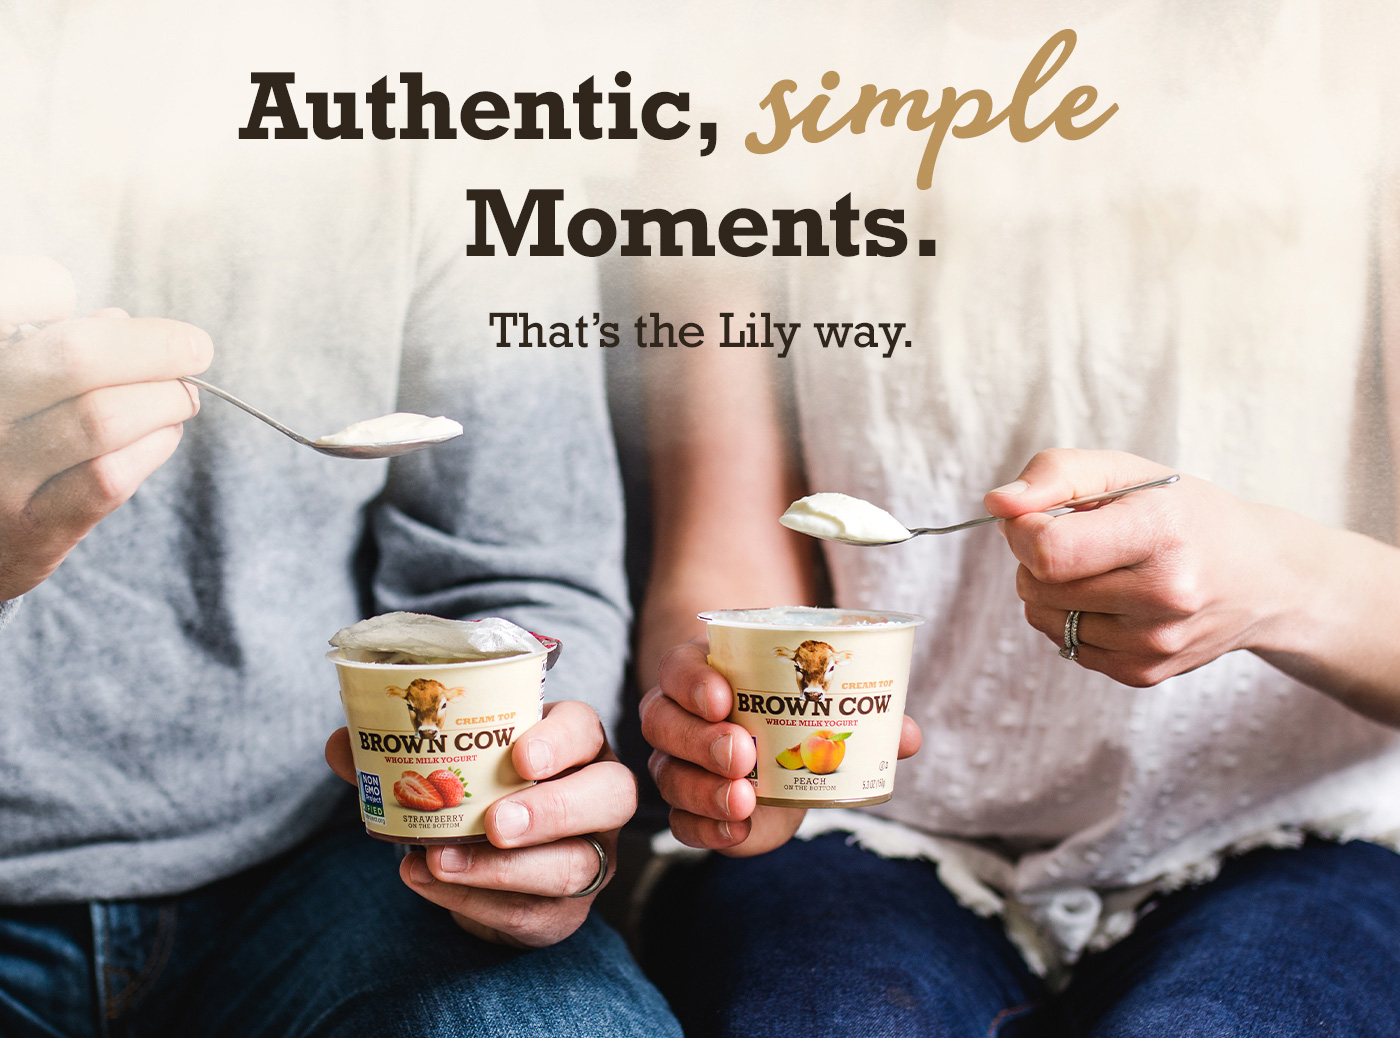 Authentic, simple Moments. That's the Lily way.